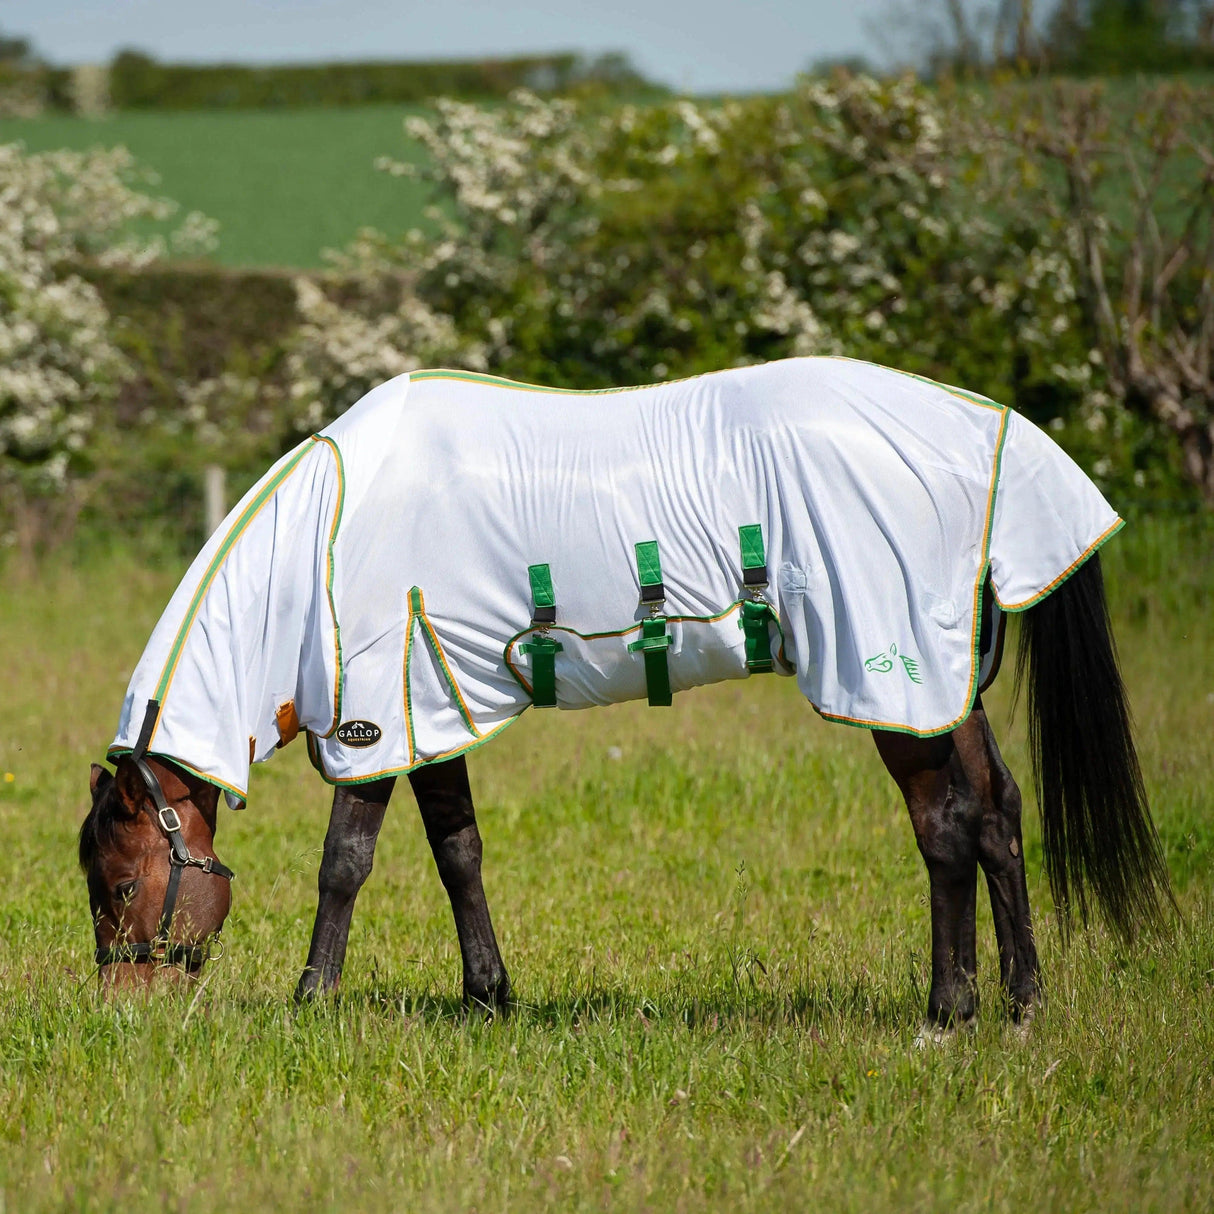 Gallop Fly Rug Mesh Combo 5'6" Gallop Equestrian Fly Rugs Barnstaple Equestrian Supplies